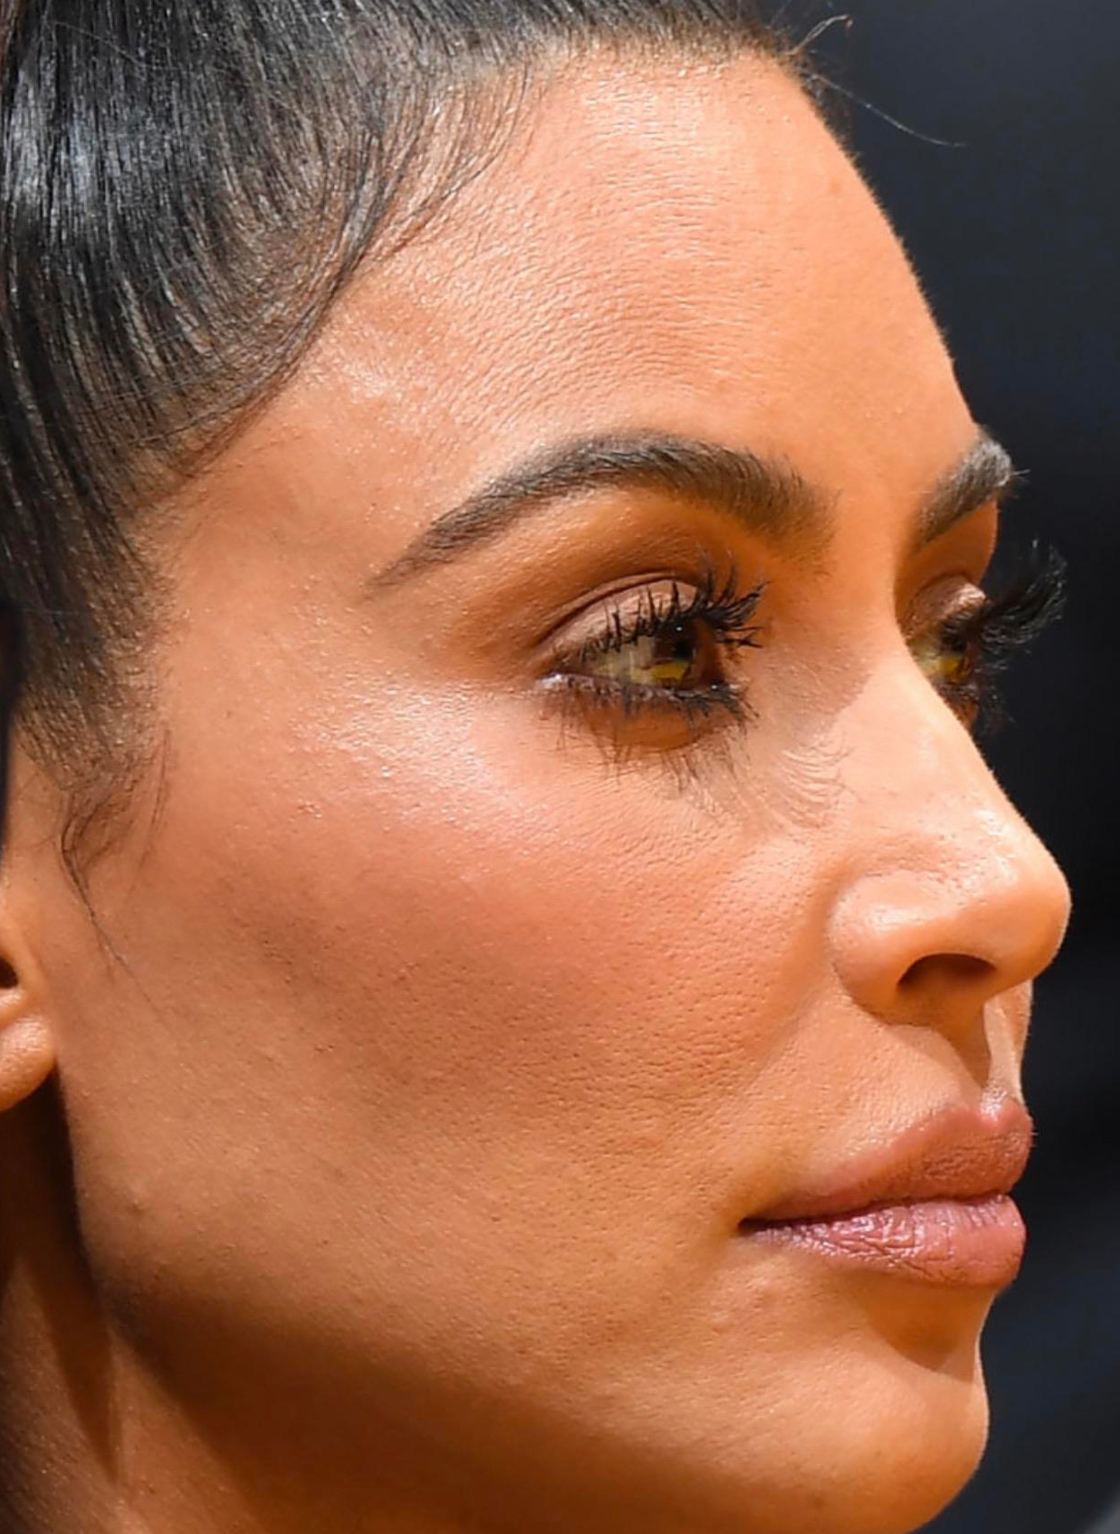 People Are Slamming Beauty Standards As Close Up Photo Of Kim